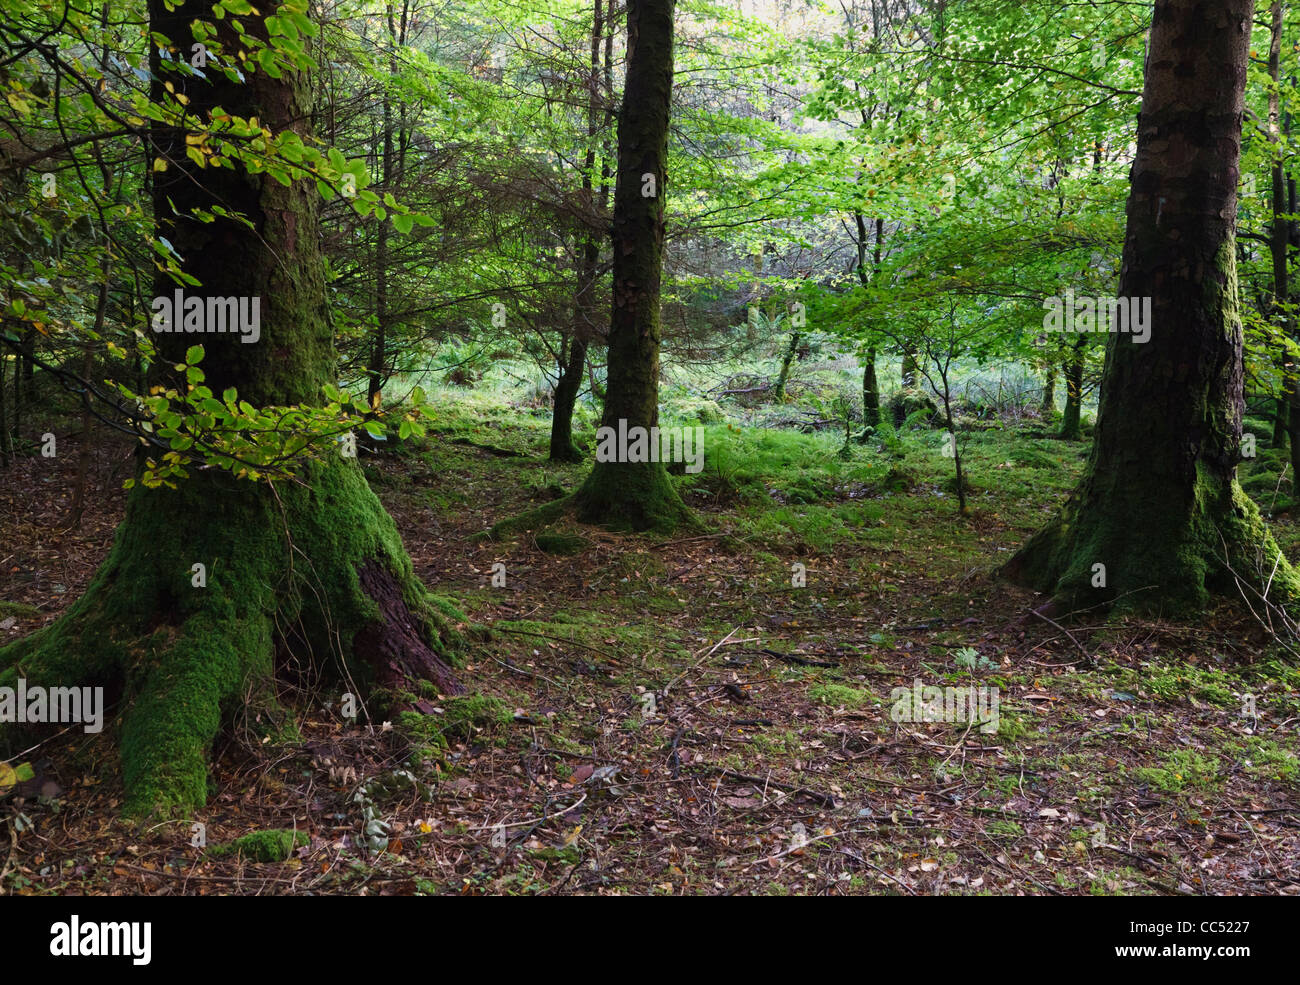 Woodland scene with old moss laden trees in Gougane Barra Forest Park, County Cork, Republic of Ireland. Stock Photo